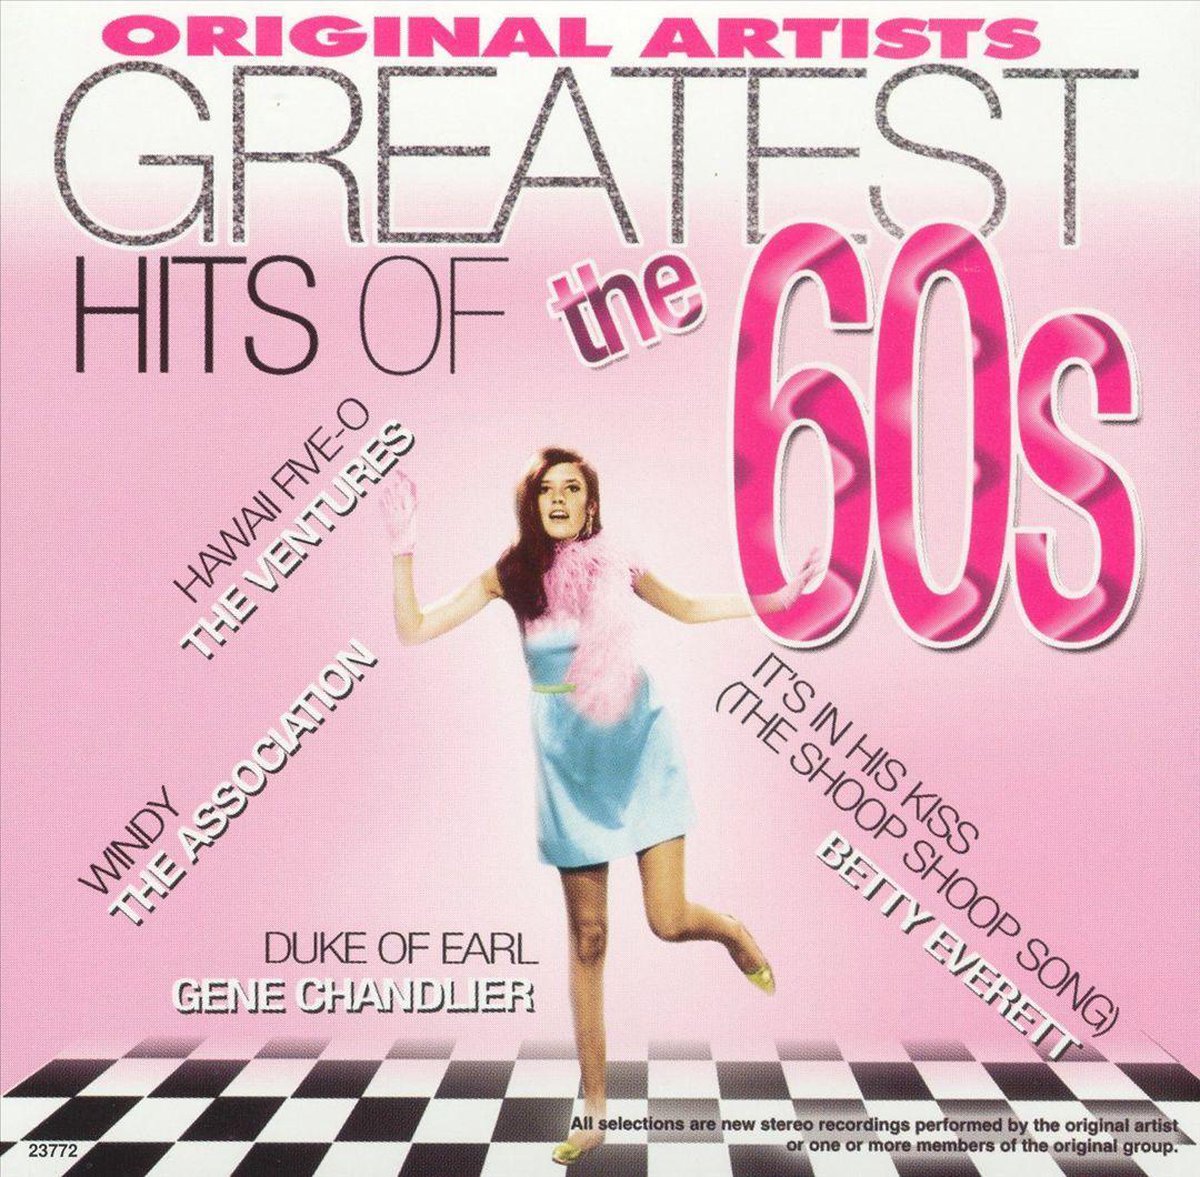 Greatest Hits of the 60's, Vol. 2 [Platinum Disc #2] - various artists